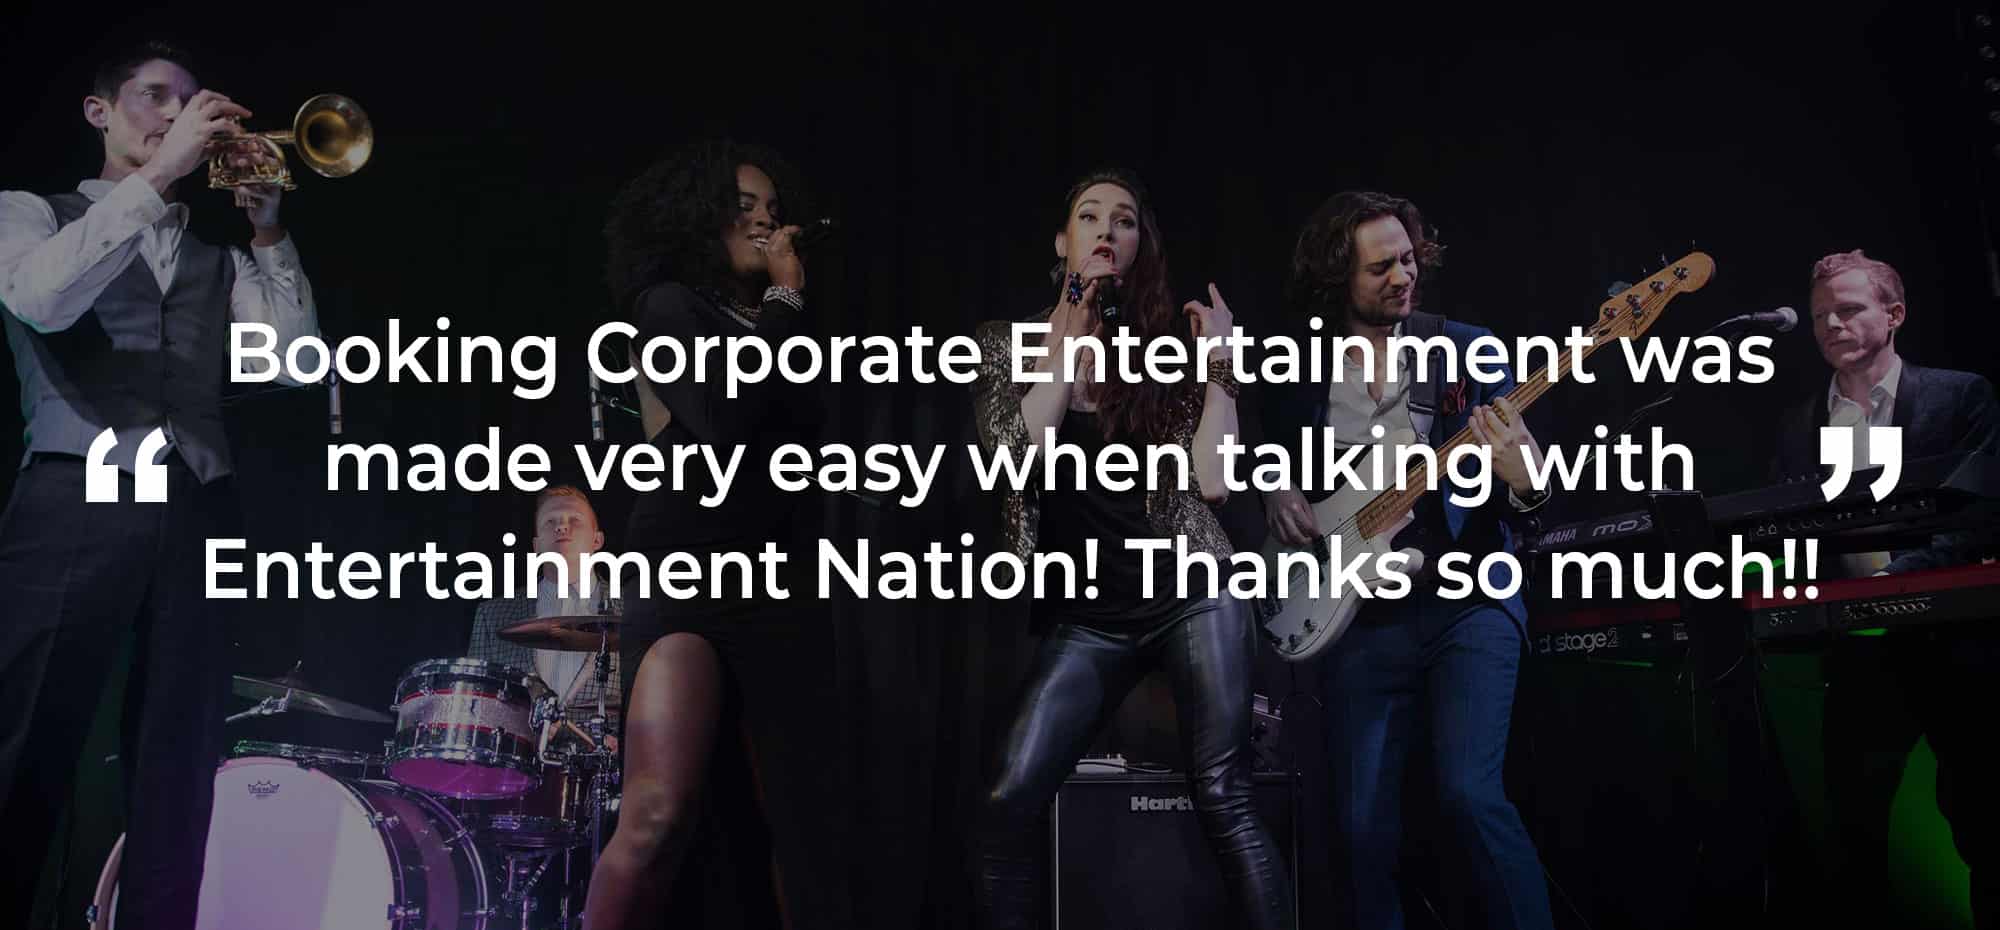 Client Review of Corporate Entertainment South Glamorgan